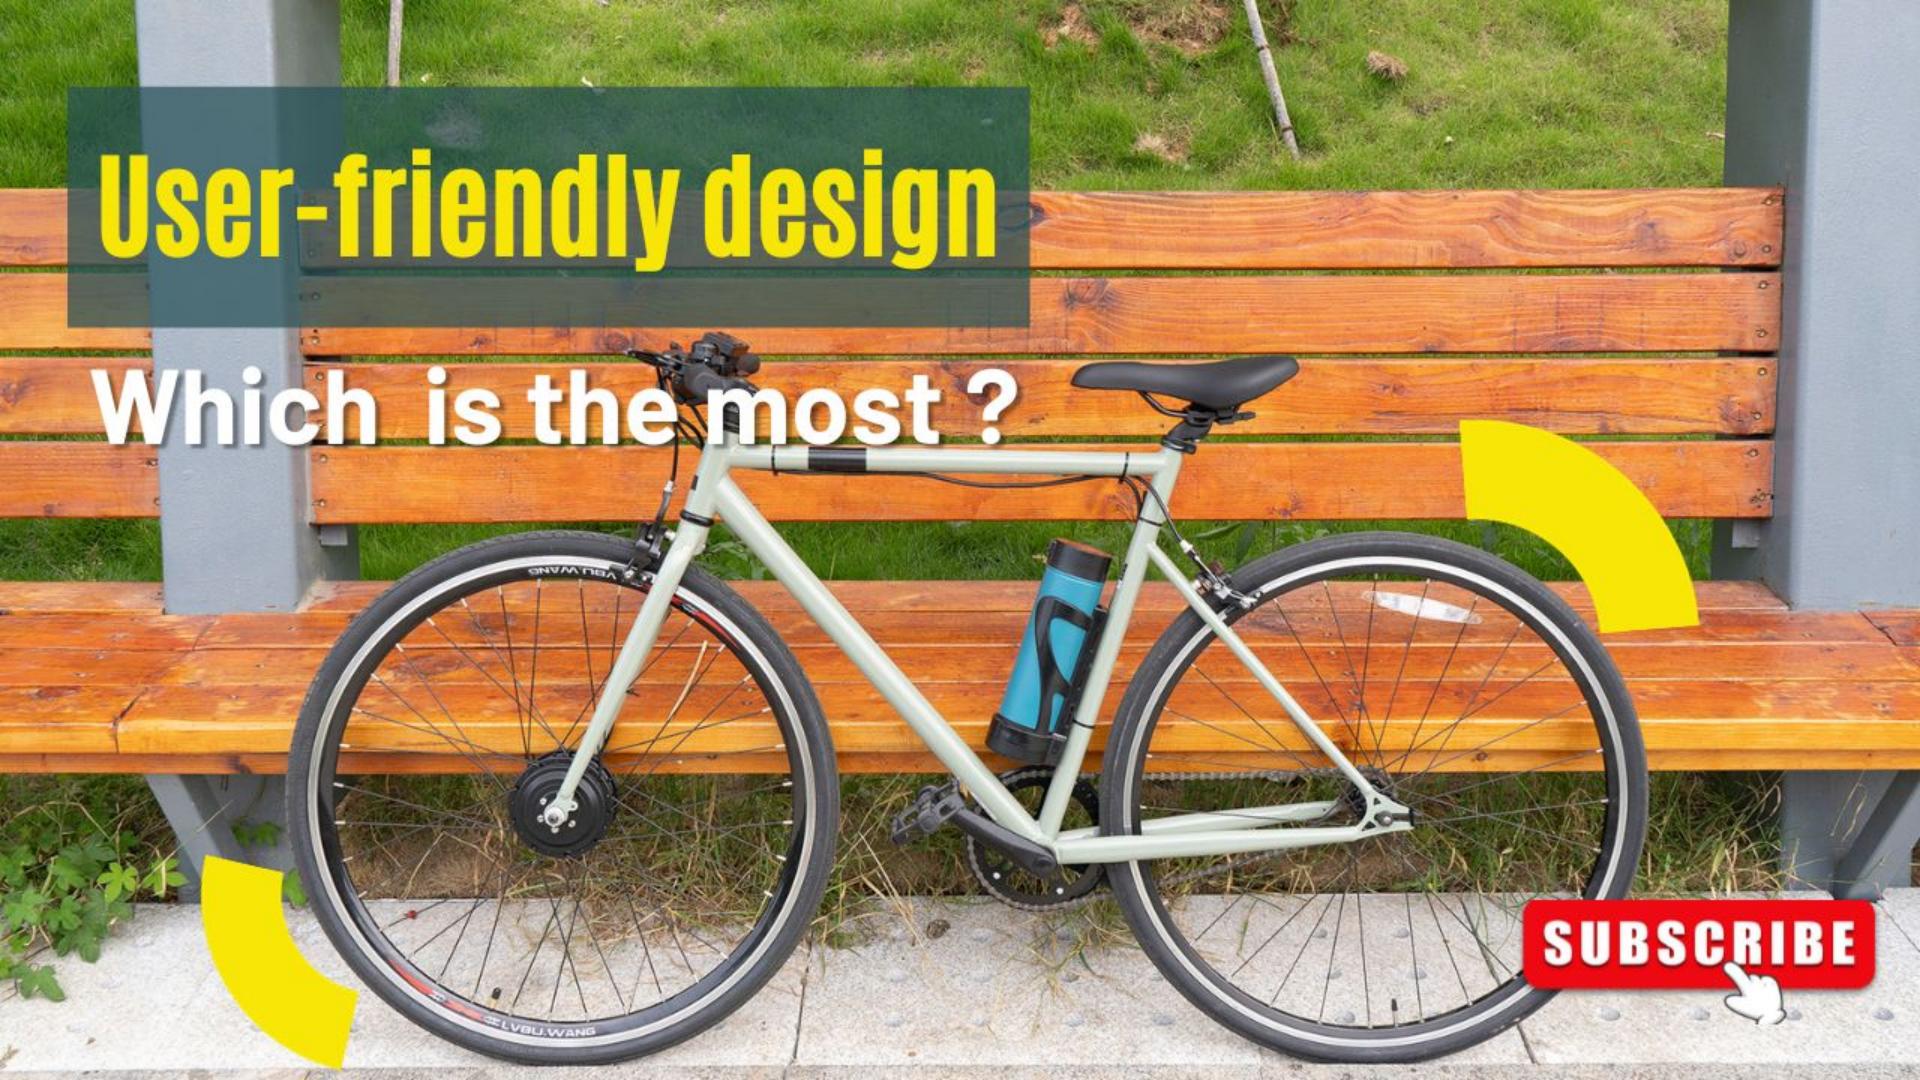 Which design do you think is the most user-friendly?